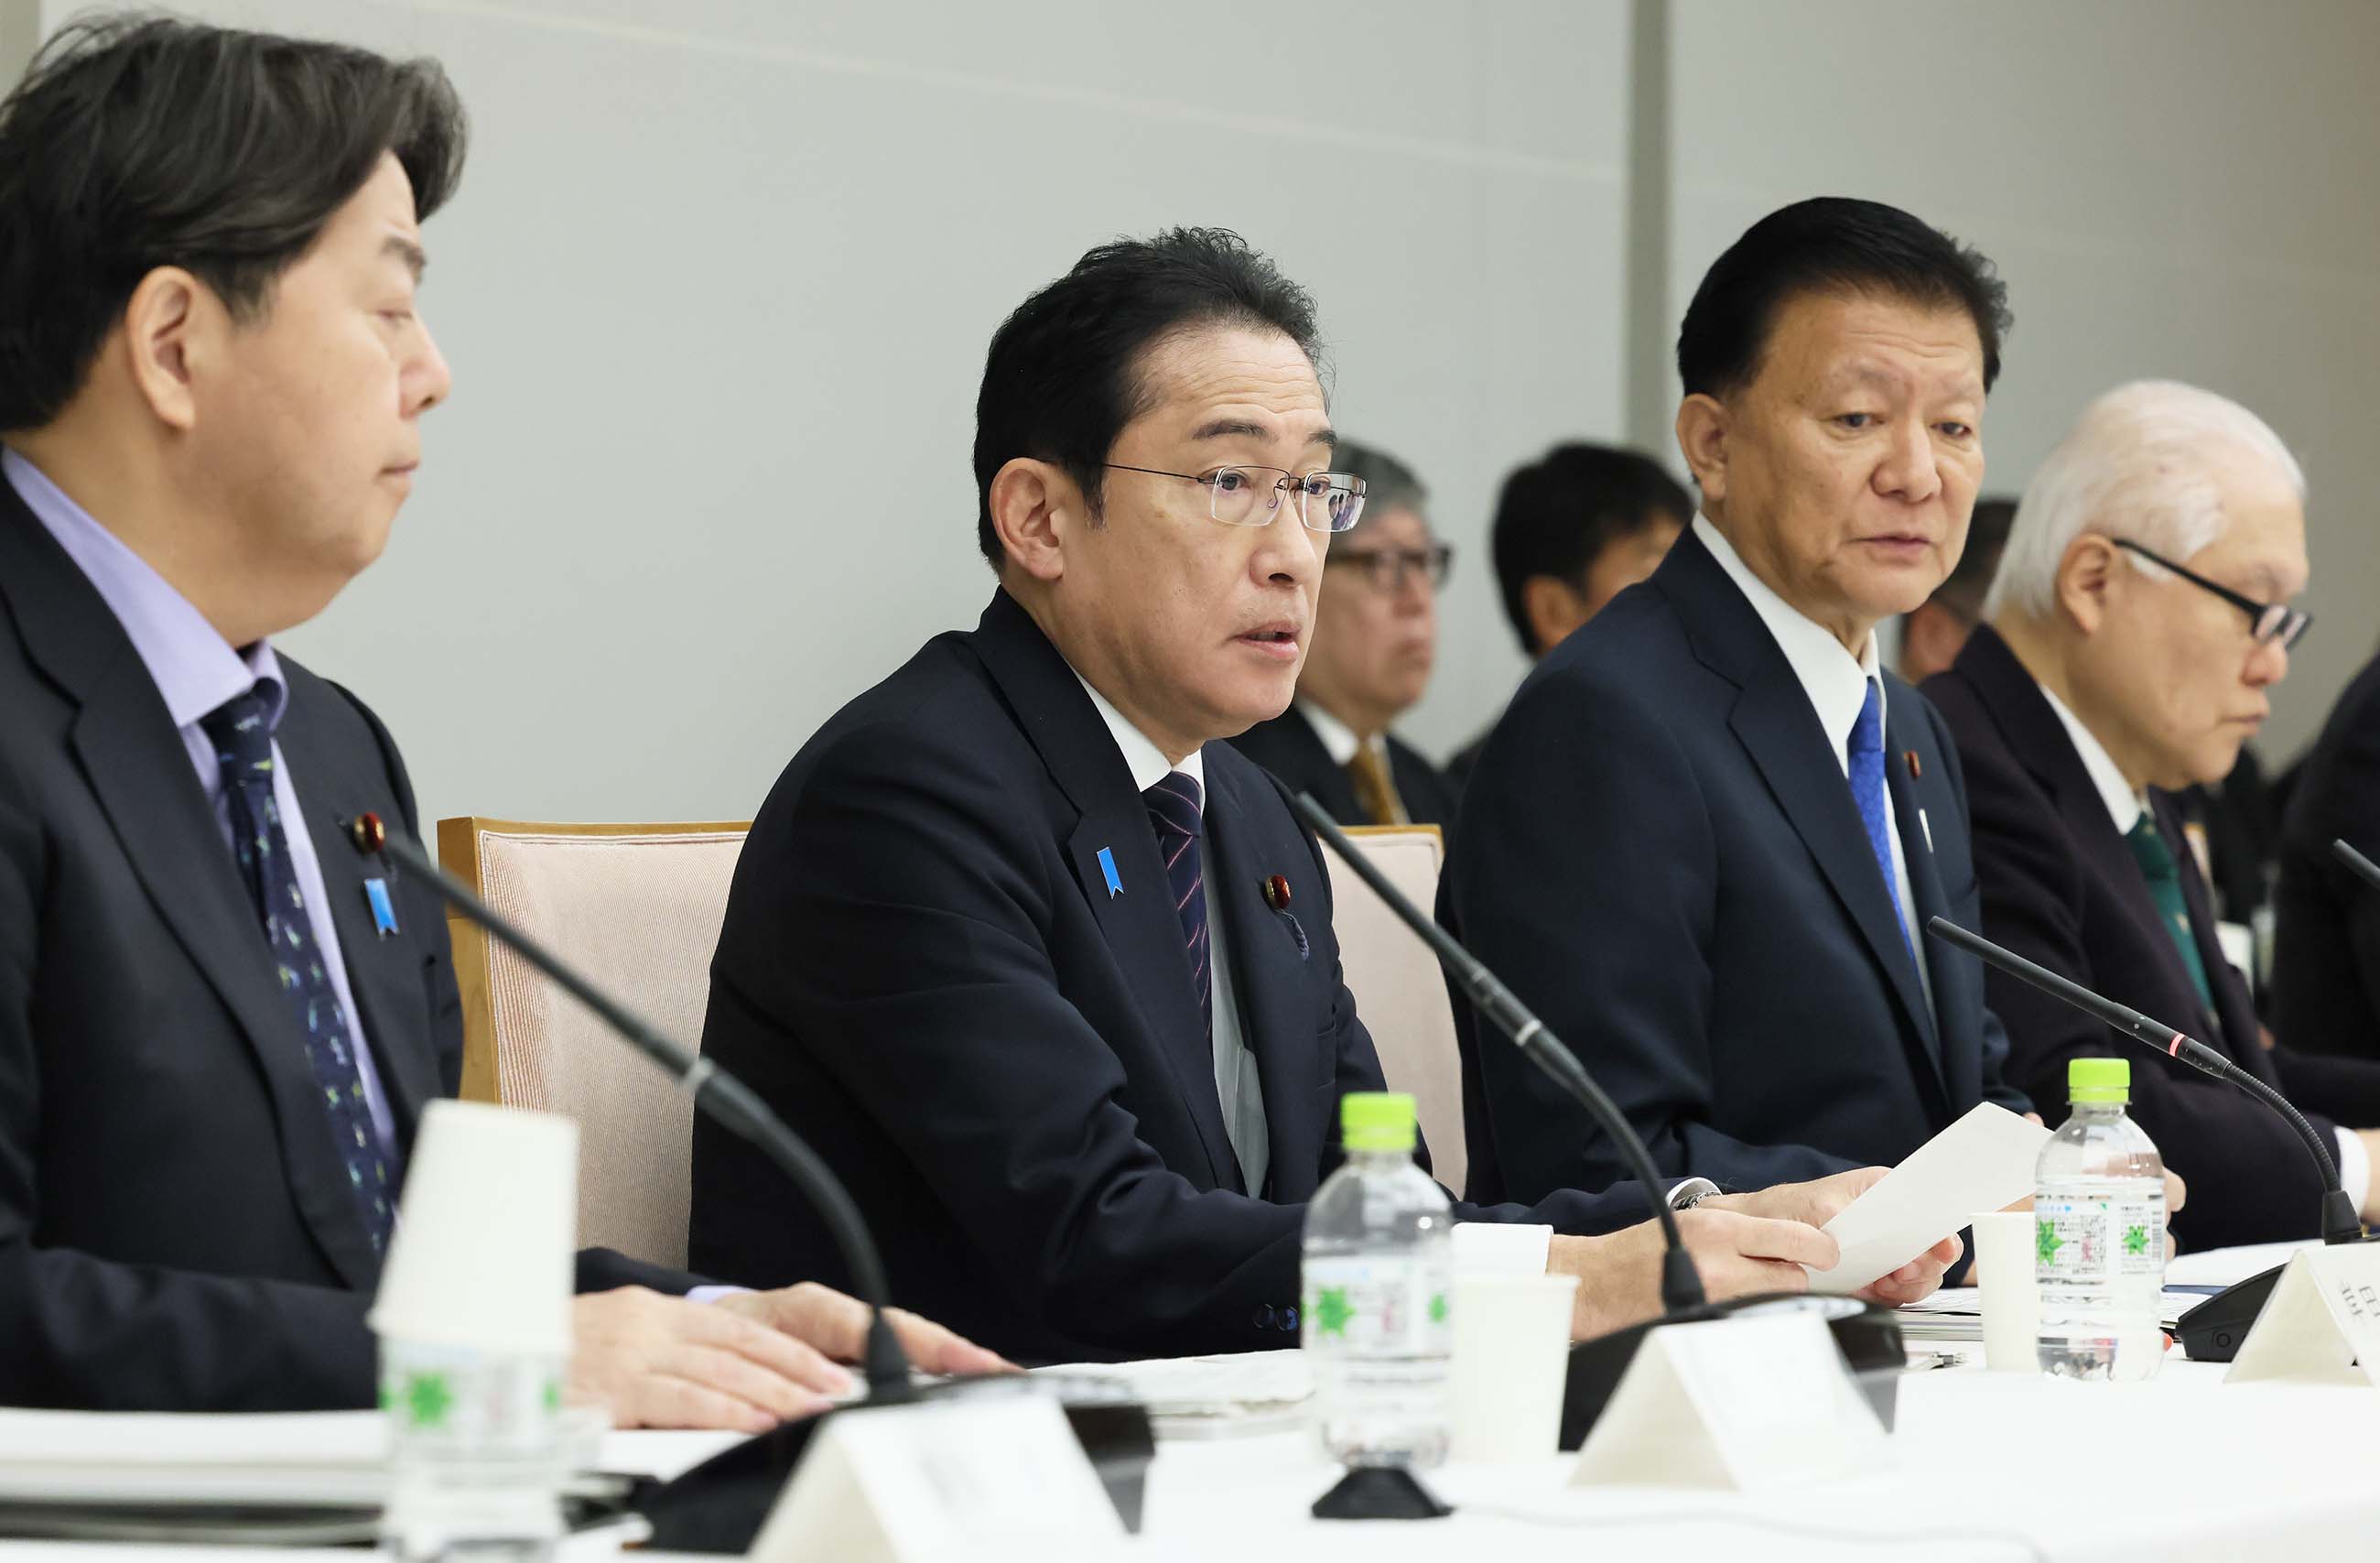 Prime Minister Kishida wrapping up an exchange of views (1)